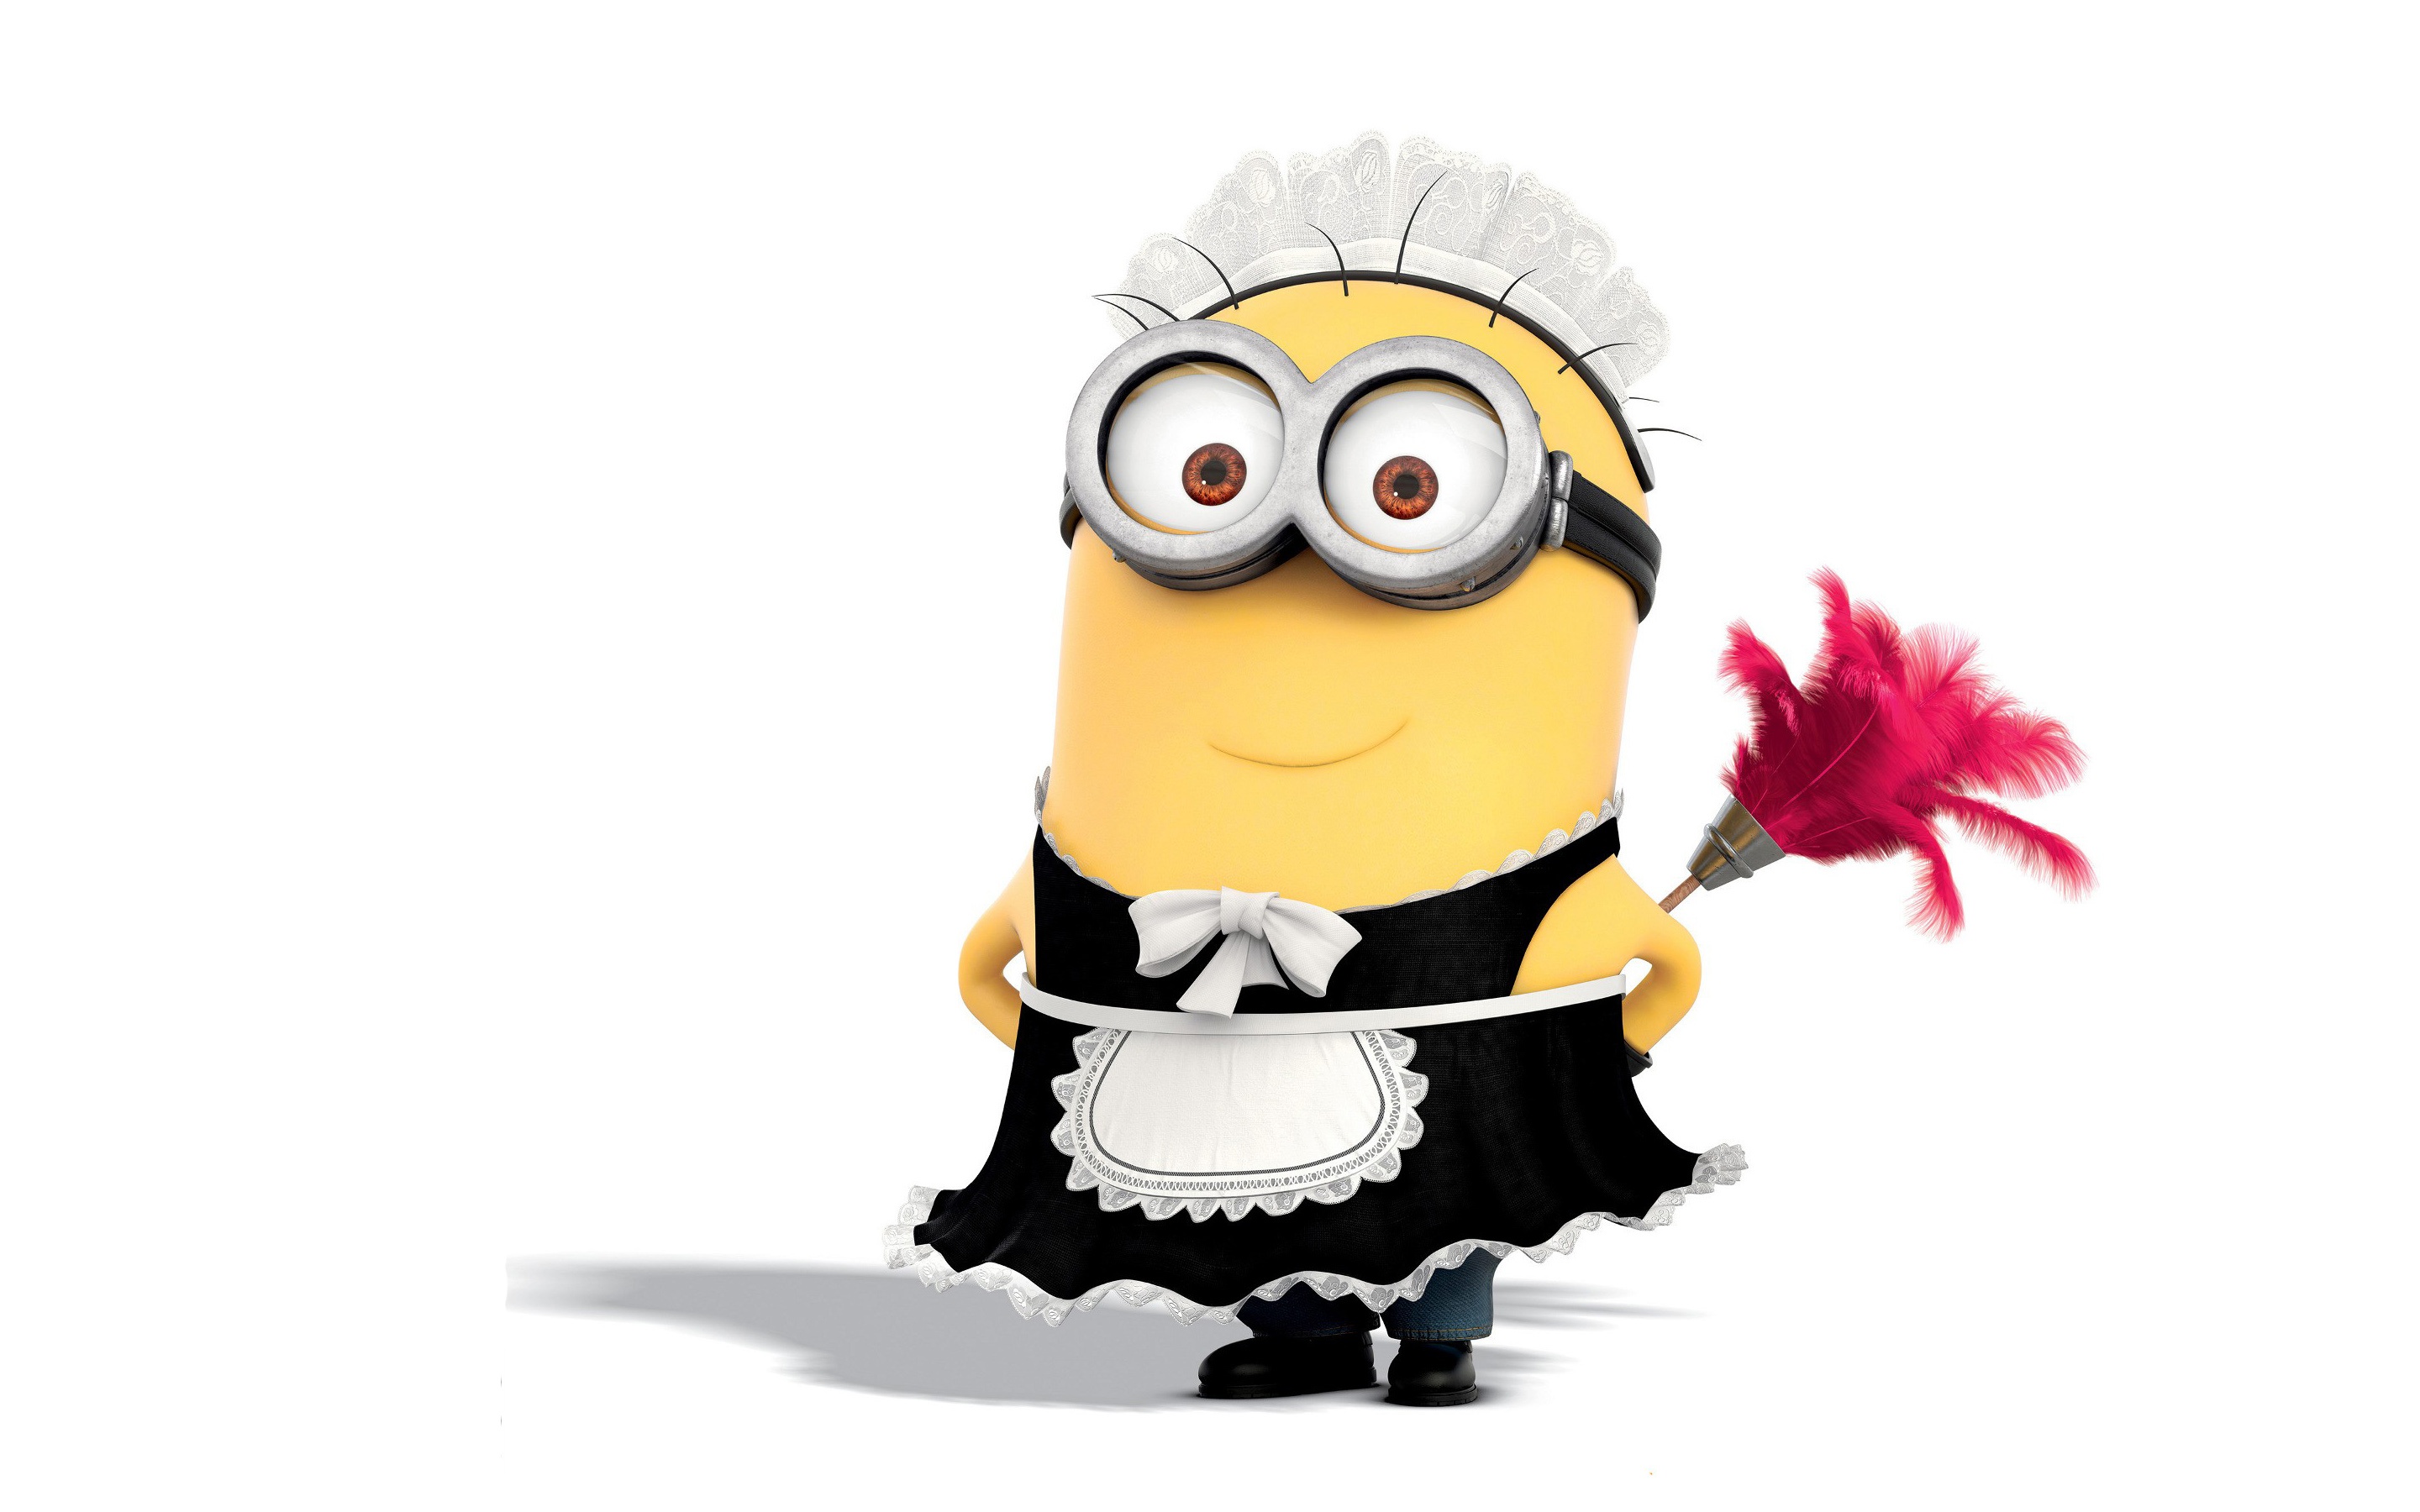 Minion Phil in Despicable Me 2 HD Wallpaper   iHD Wallpapers